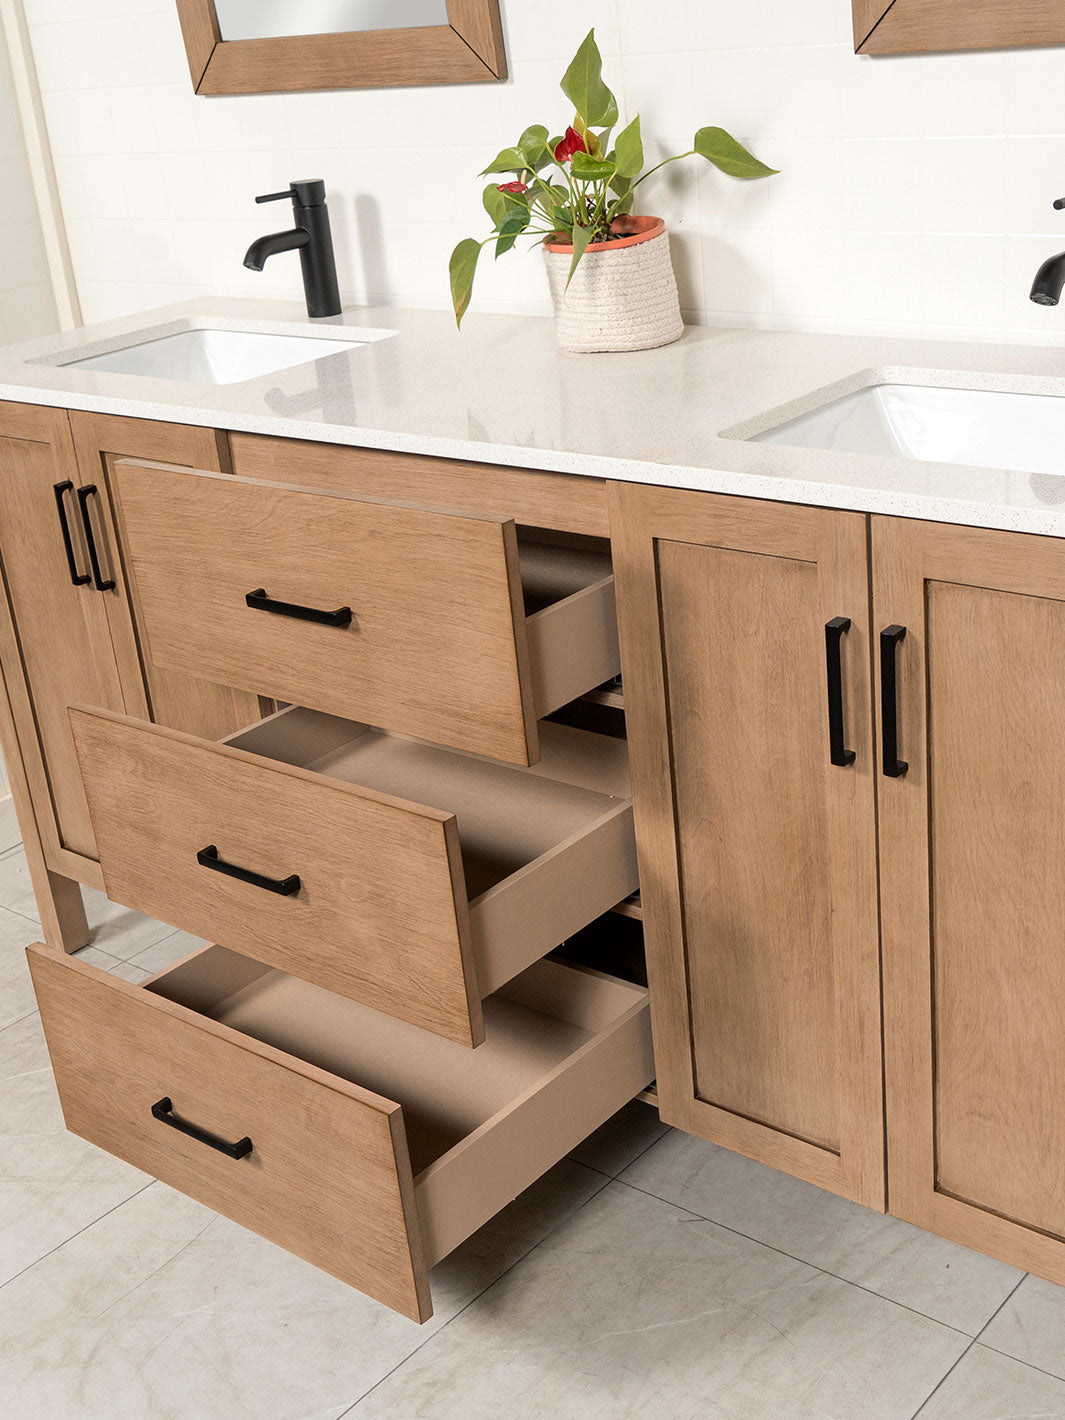 drawers of the double vanity